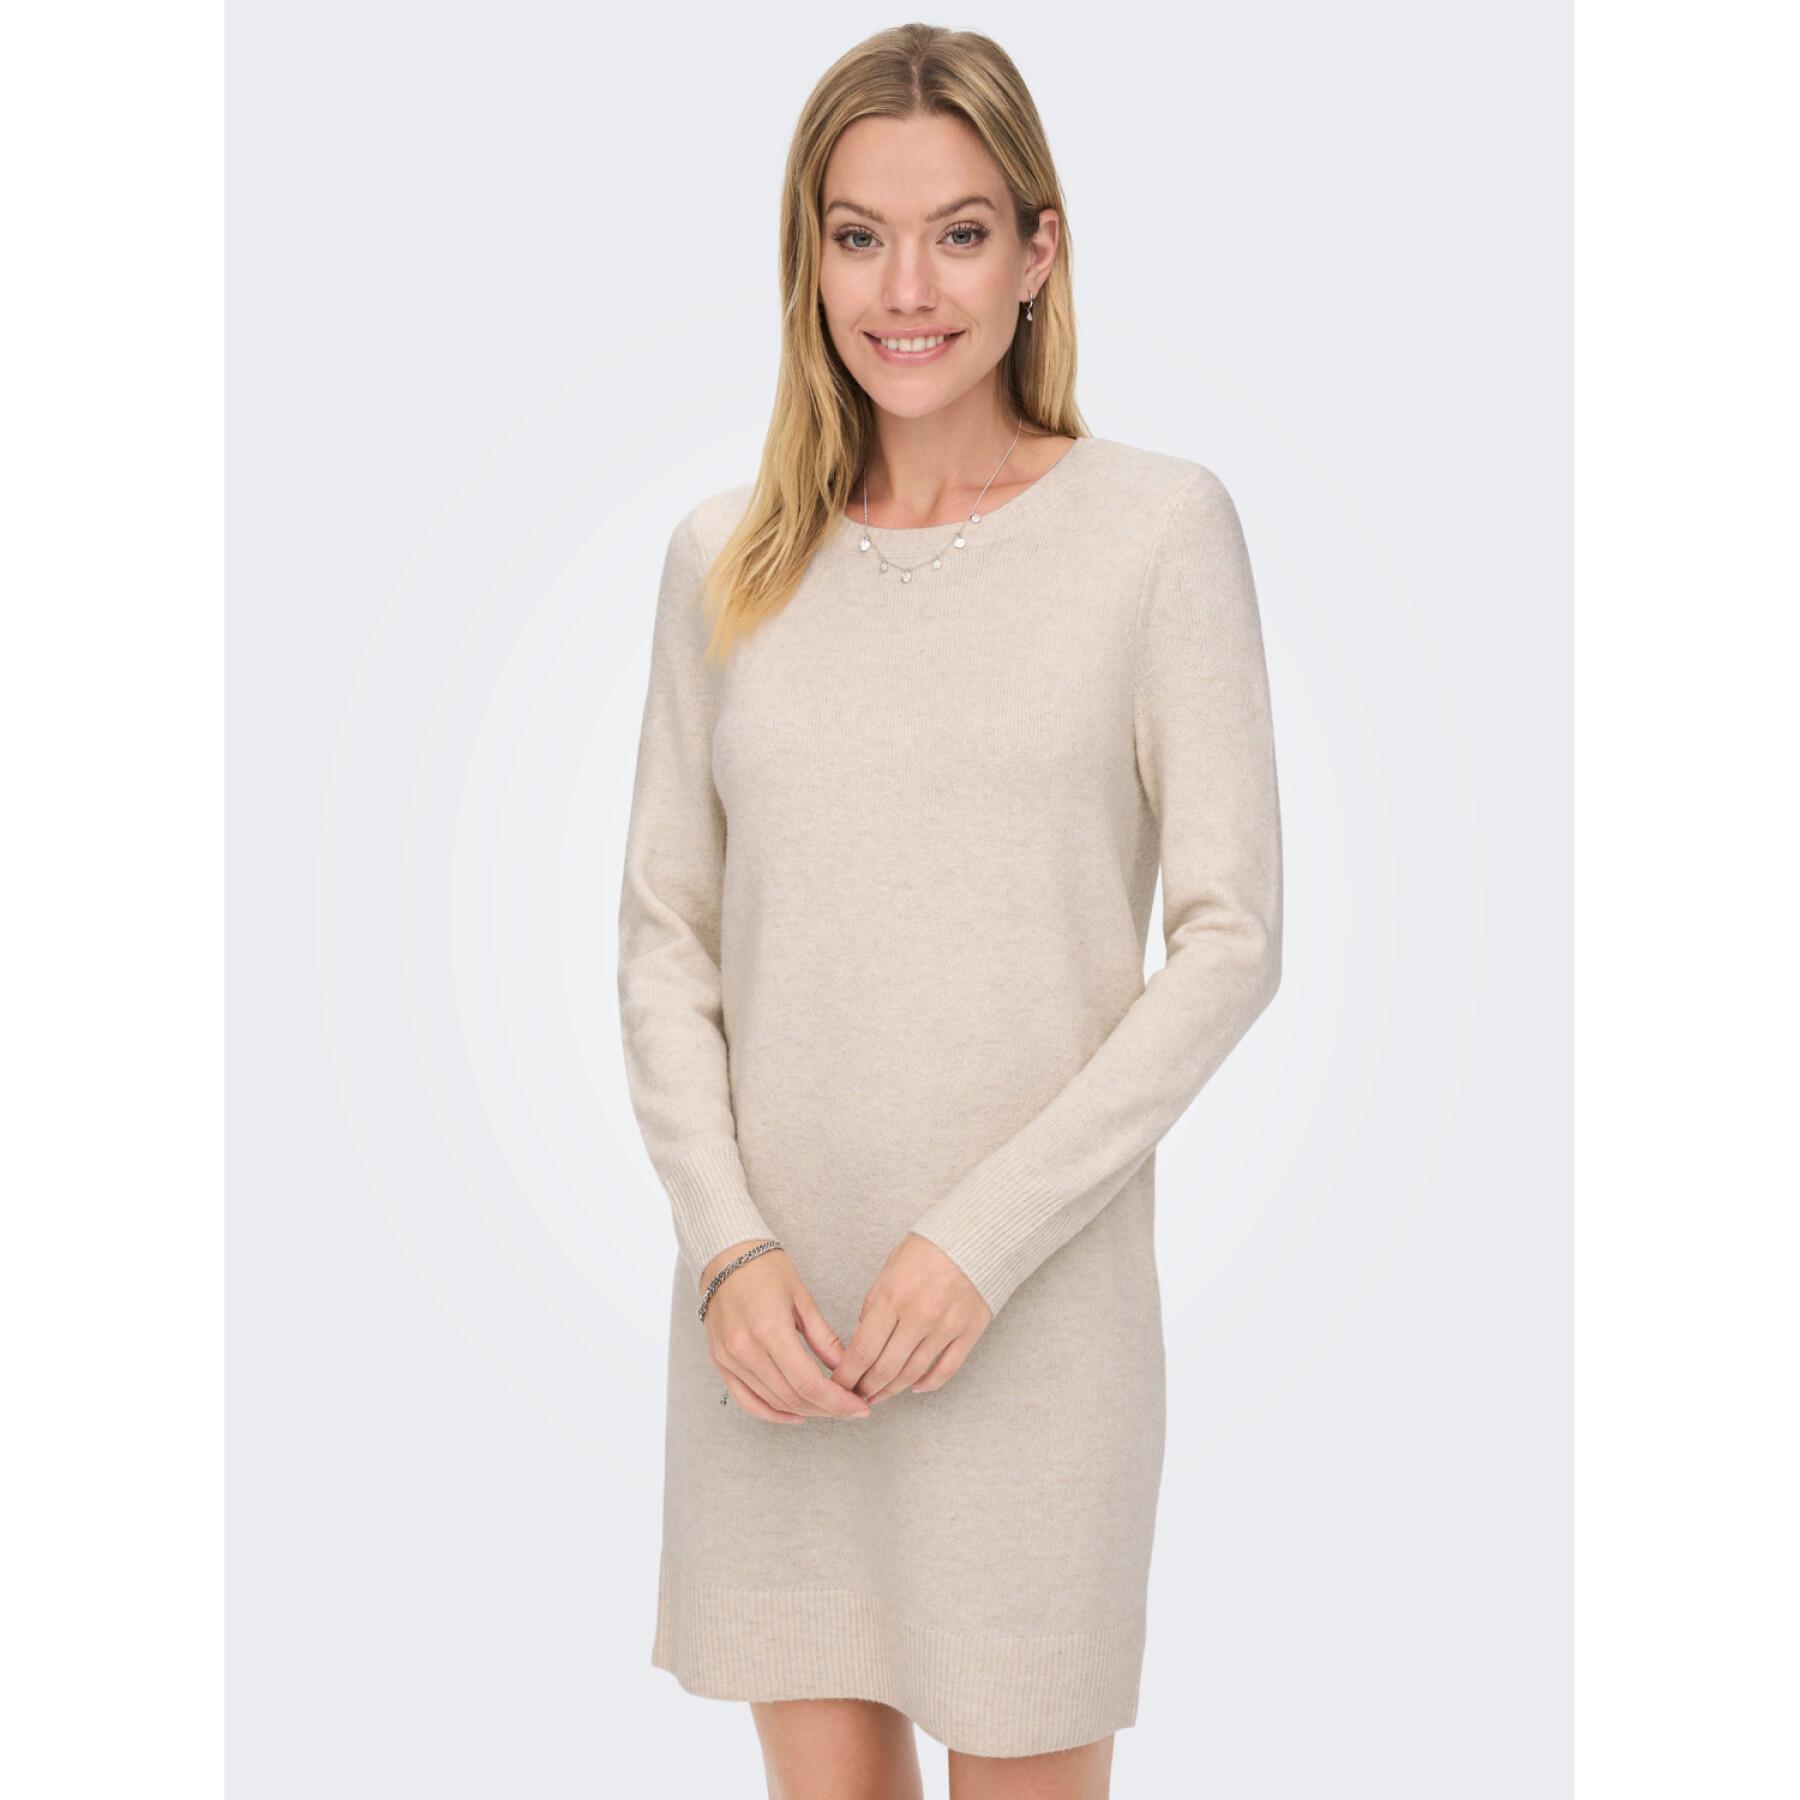 Women's round neck sweater dress Only Rica Life